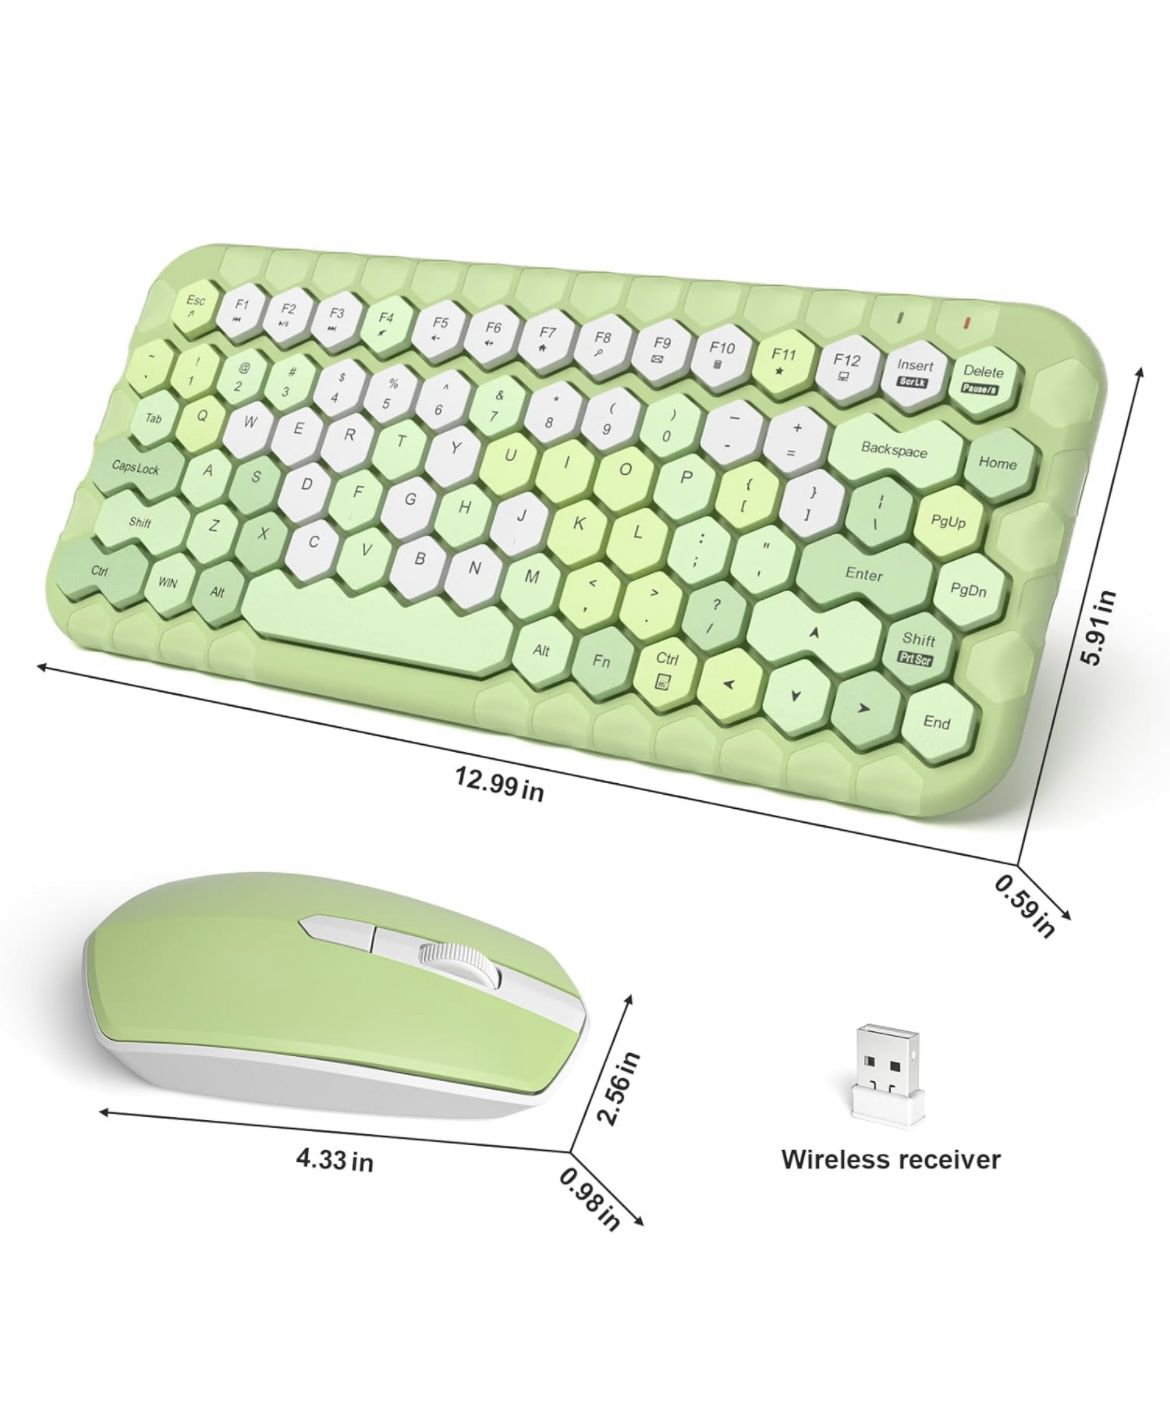 MOFII Wireless Keyboard And Mouse 